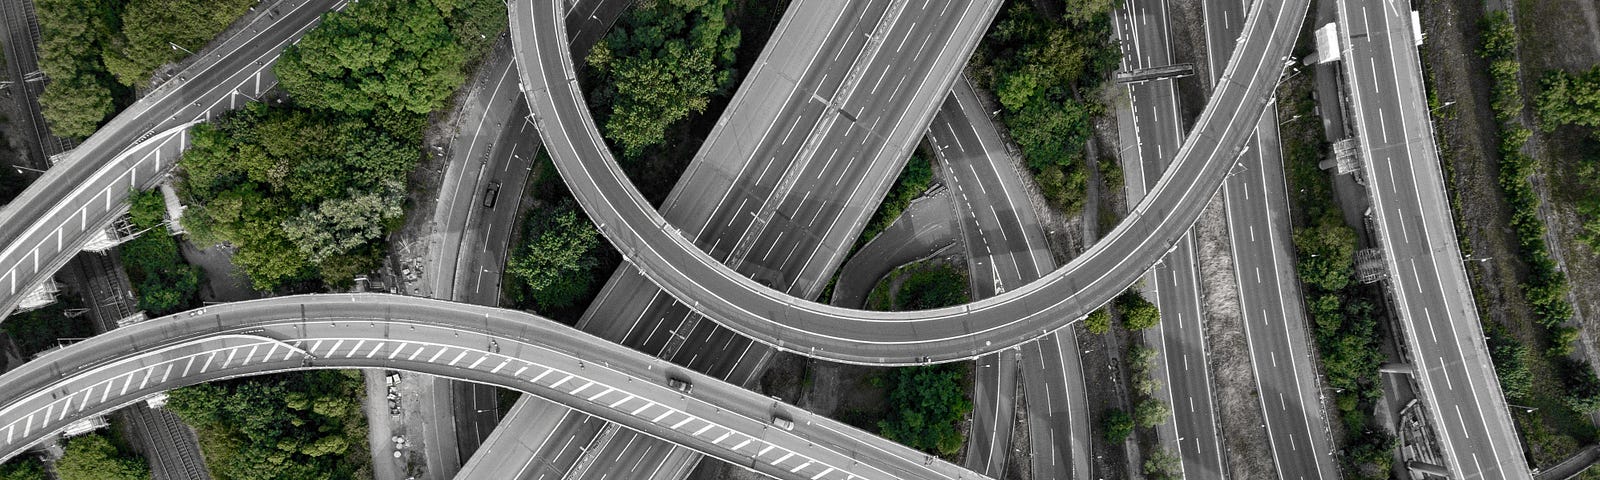 Aerial view of a superhighway with multiple levels.